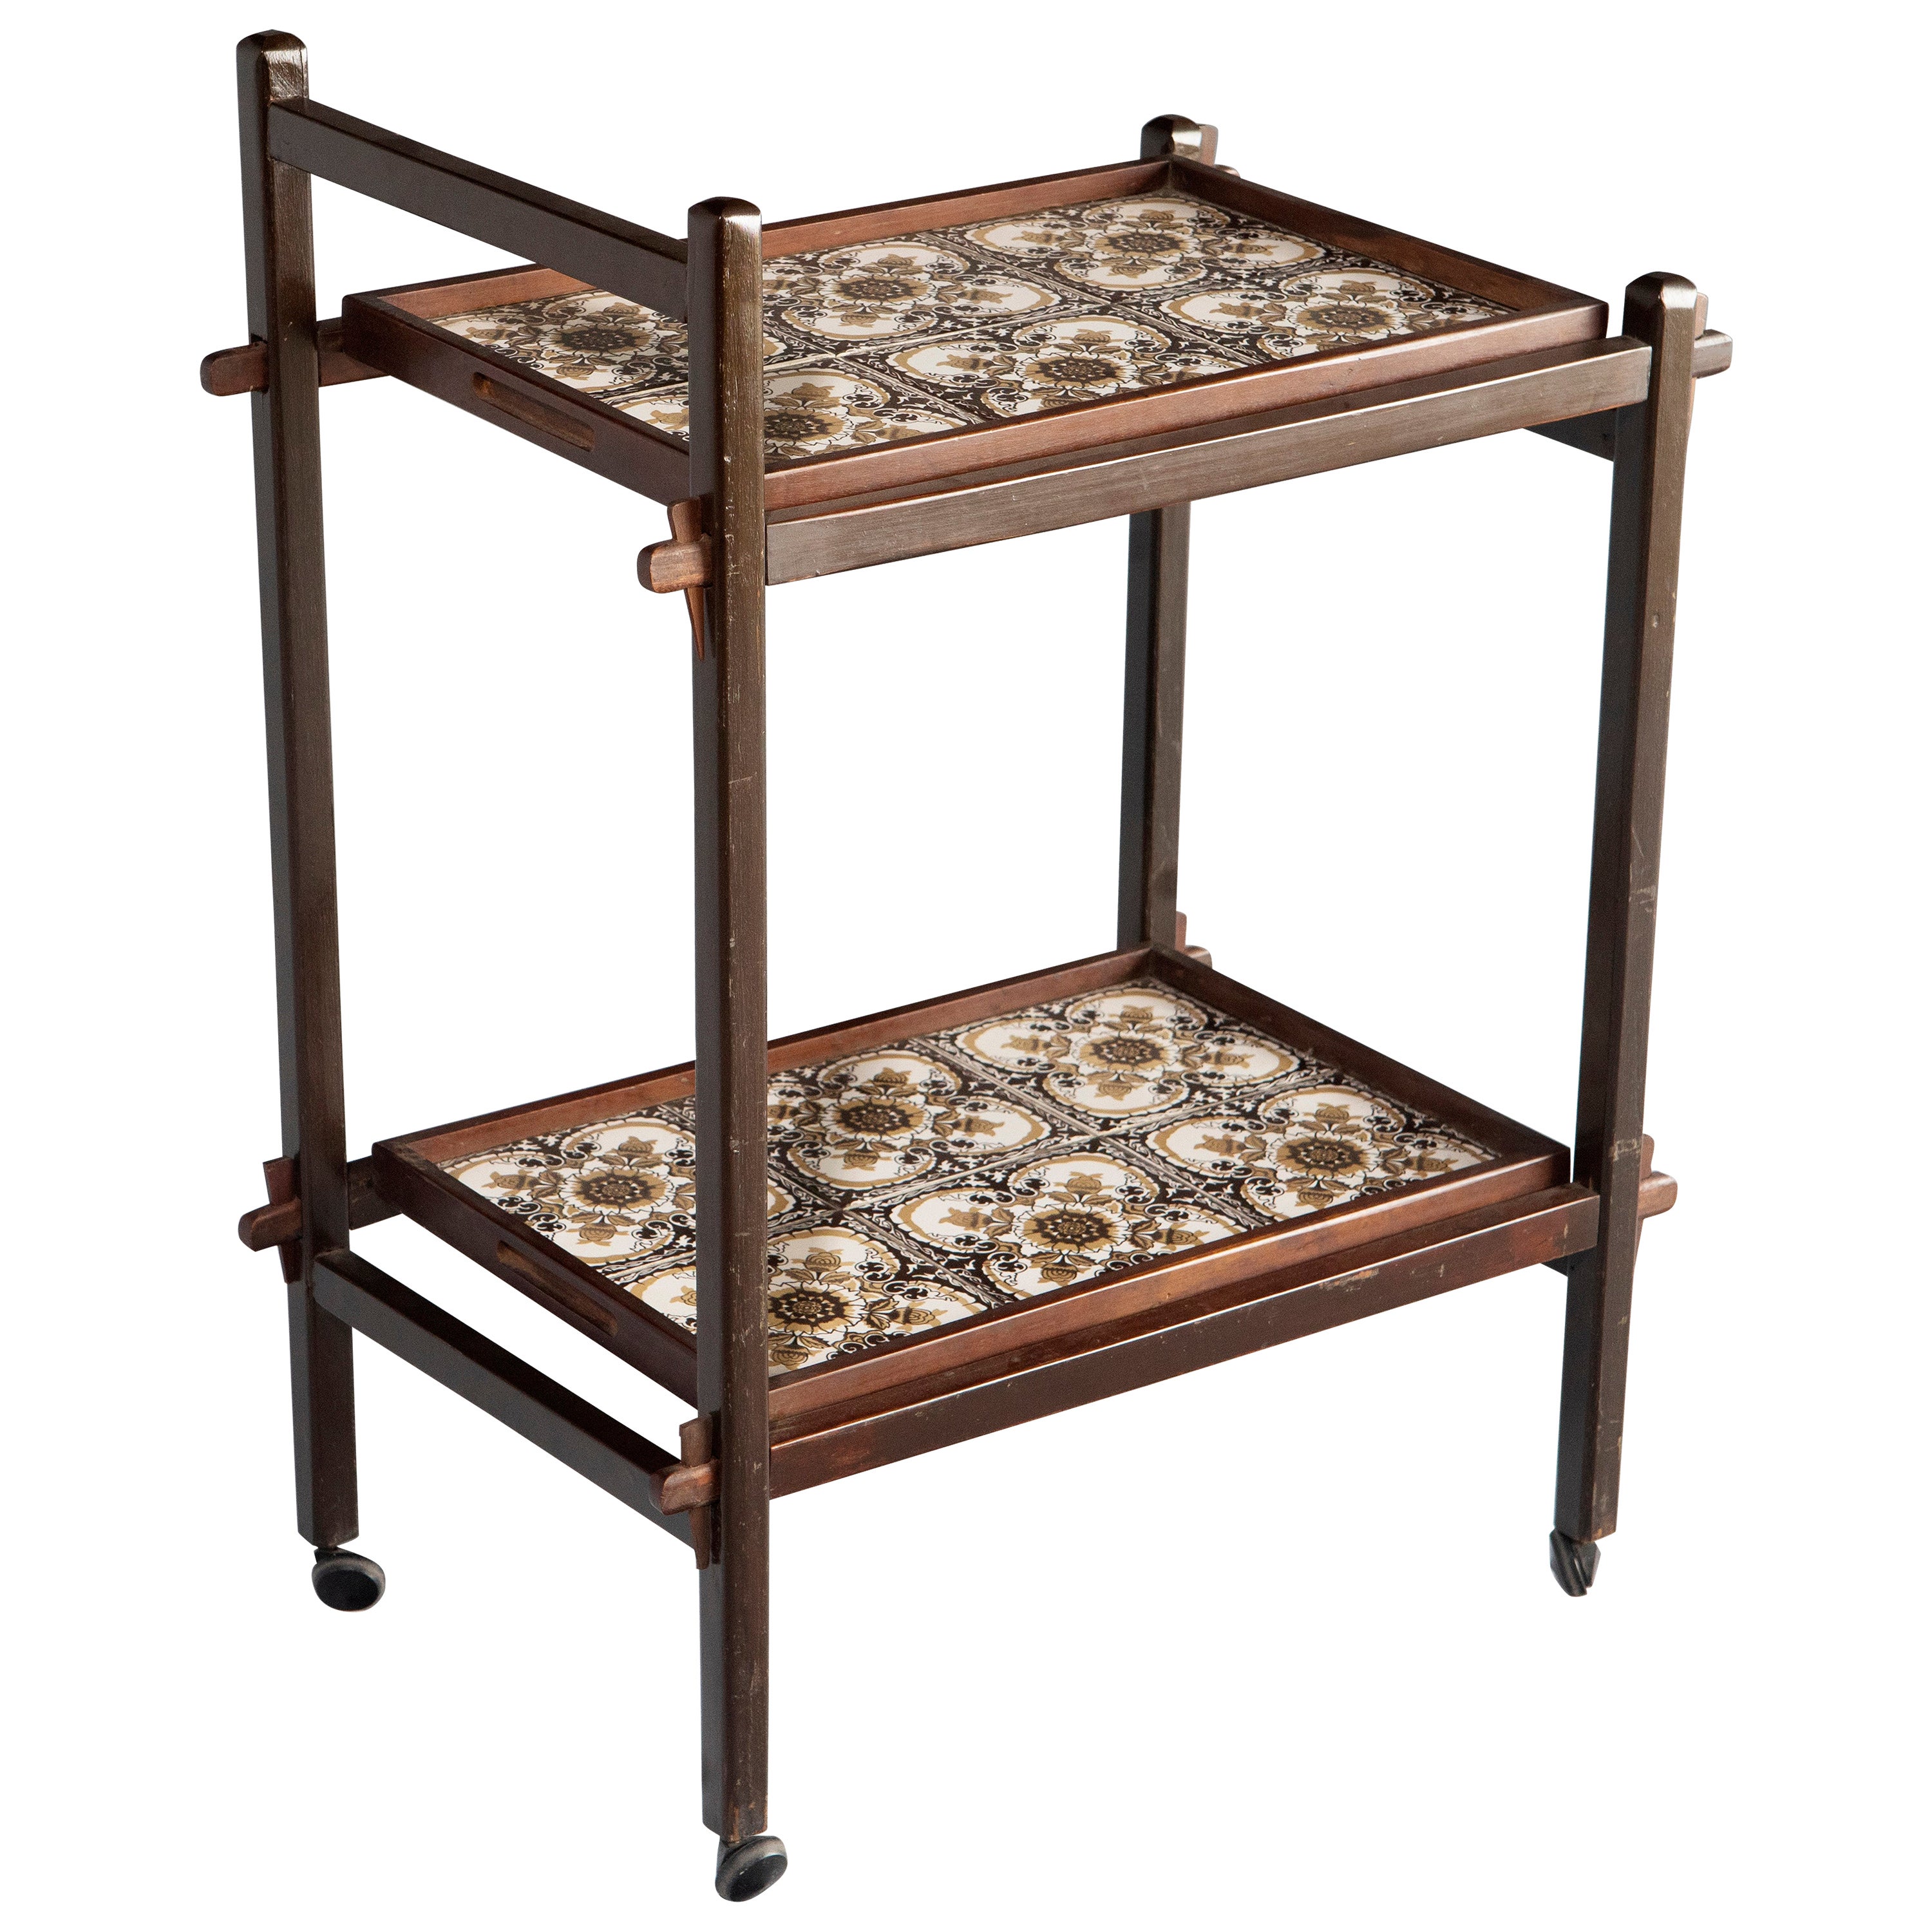 Brazilian Mid-Century Modern Tiled Tea-Cart with Removable Trays, Brazil, 1960s For Sale